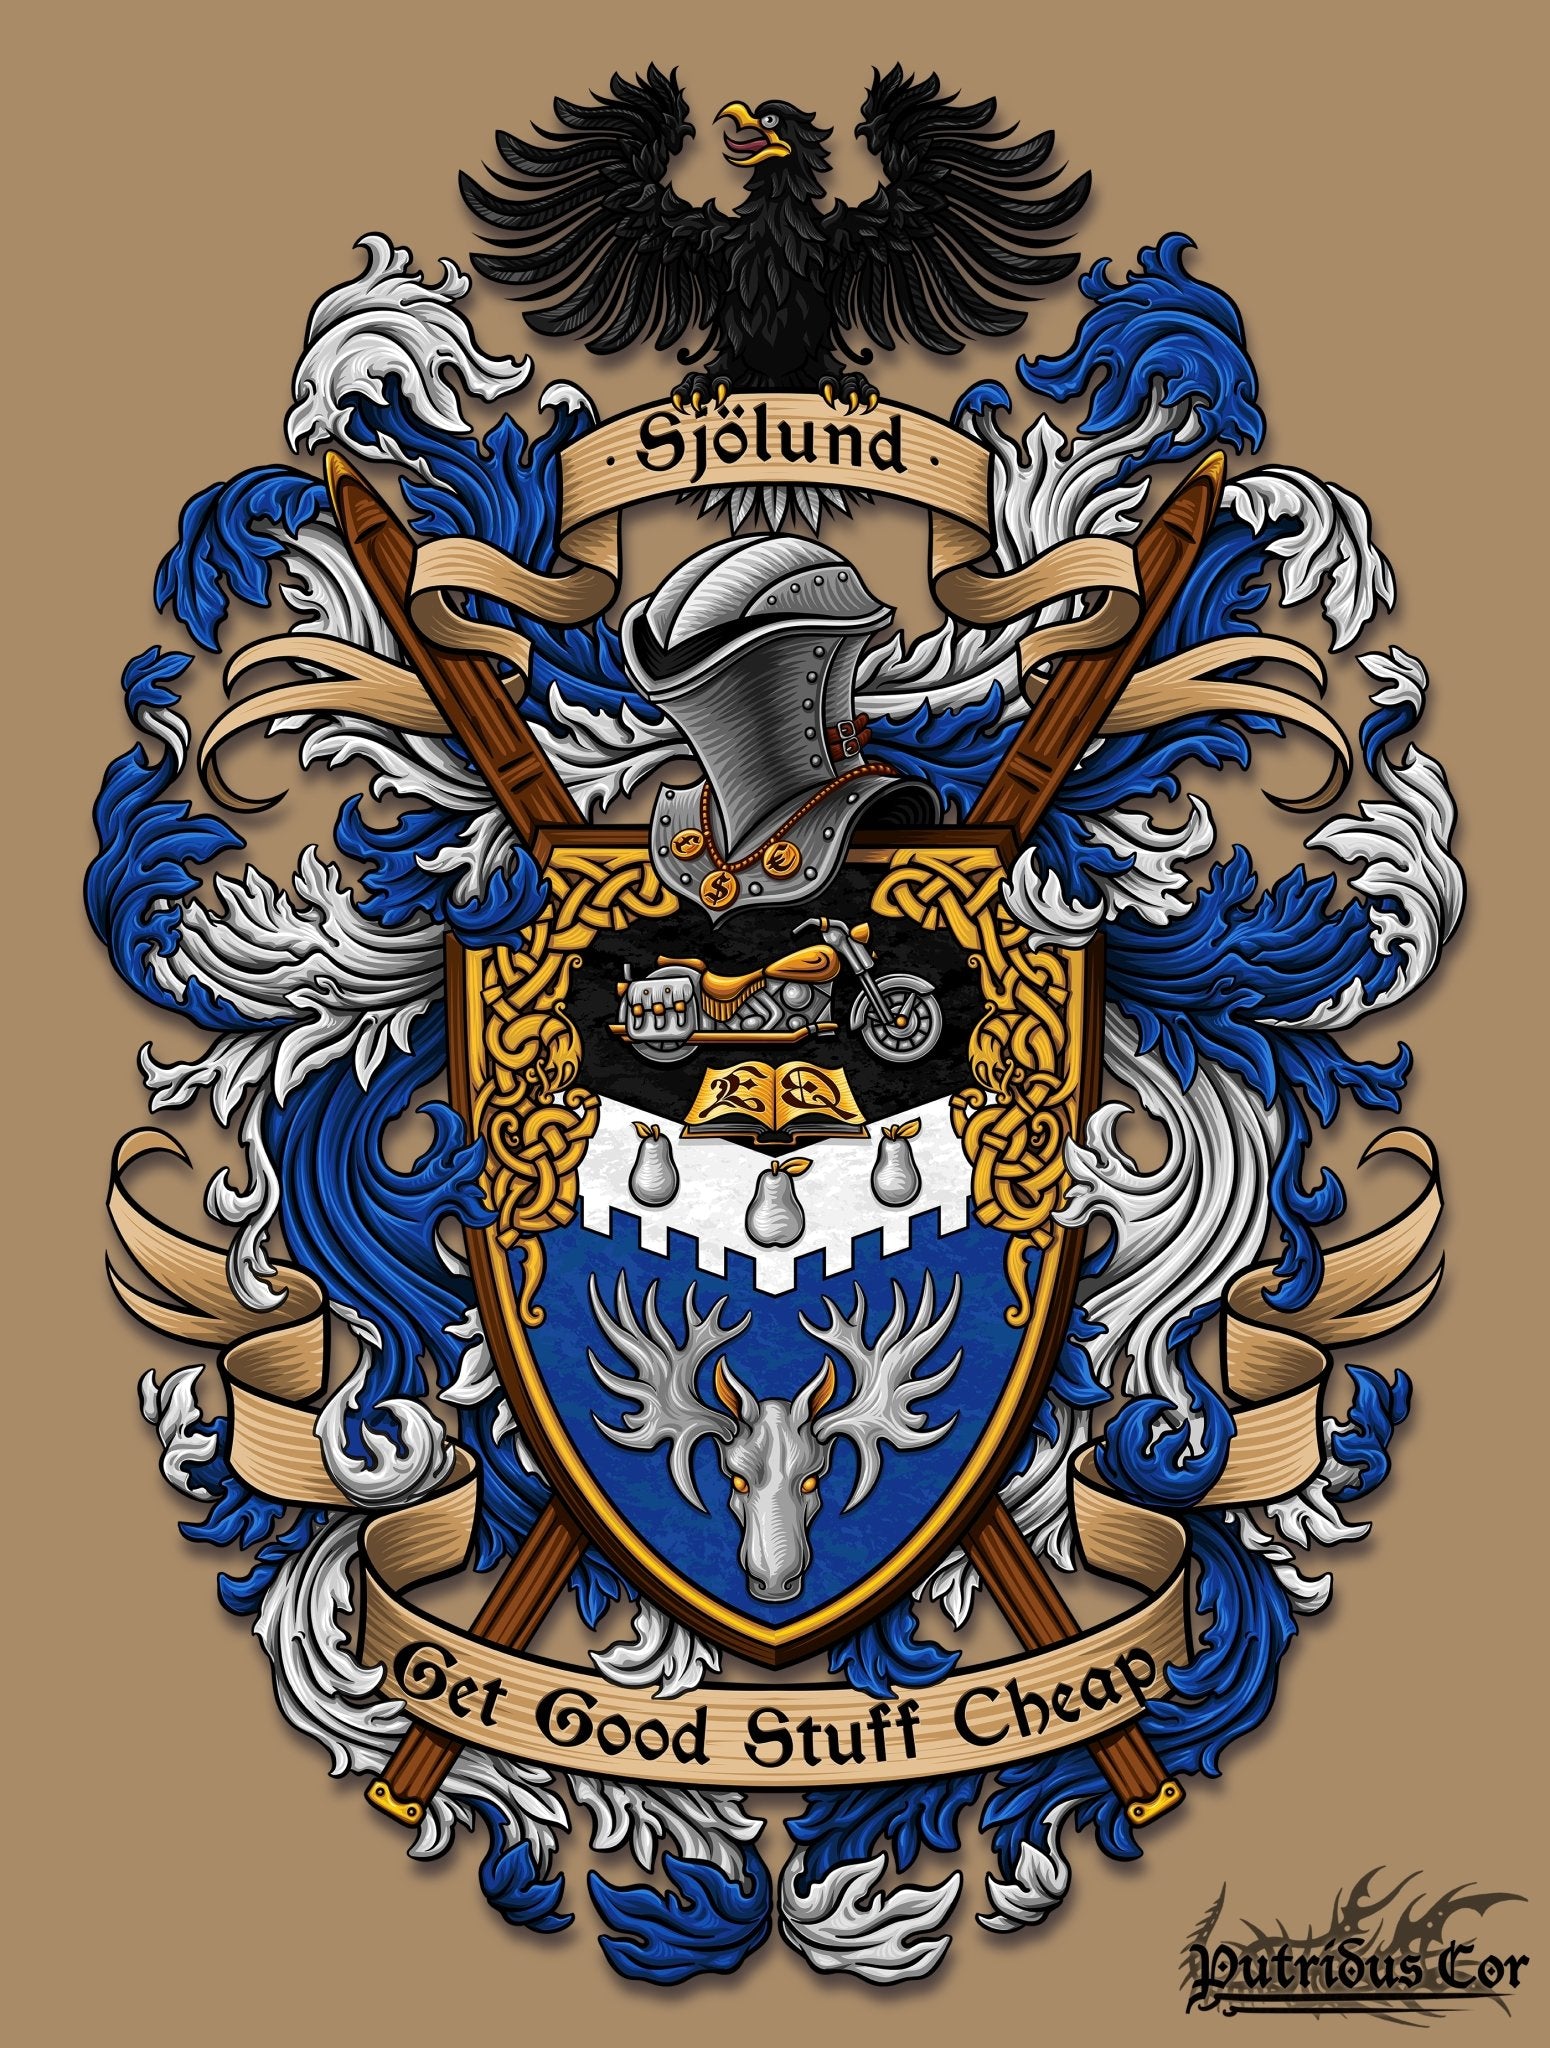 Viking Family Crest, Design your own Custom Coat of Arms with Nordic elements, Personalized Heraldry Art, or Emblem Logo